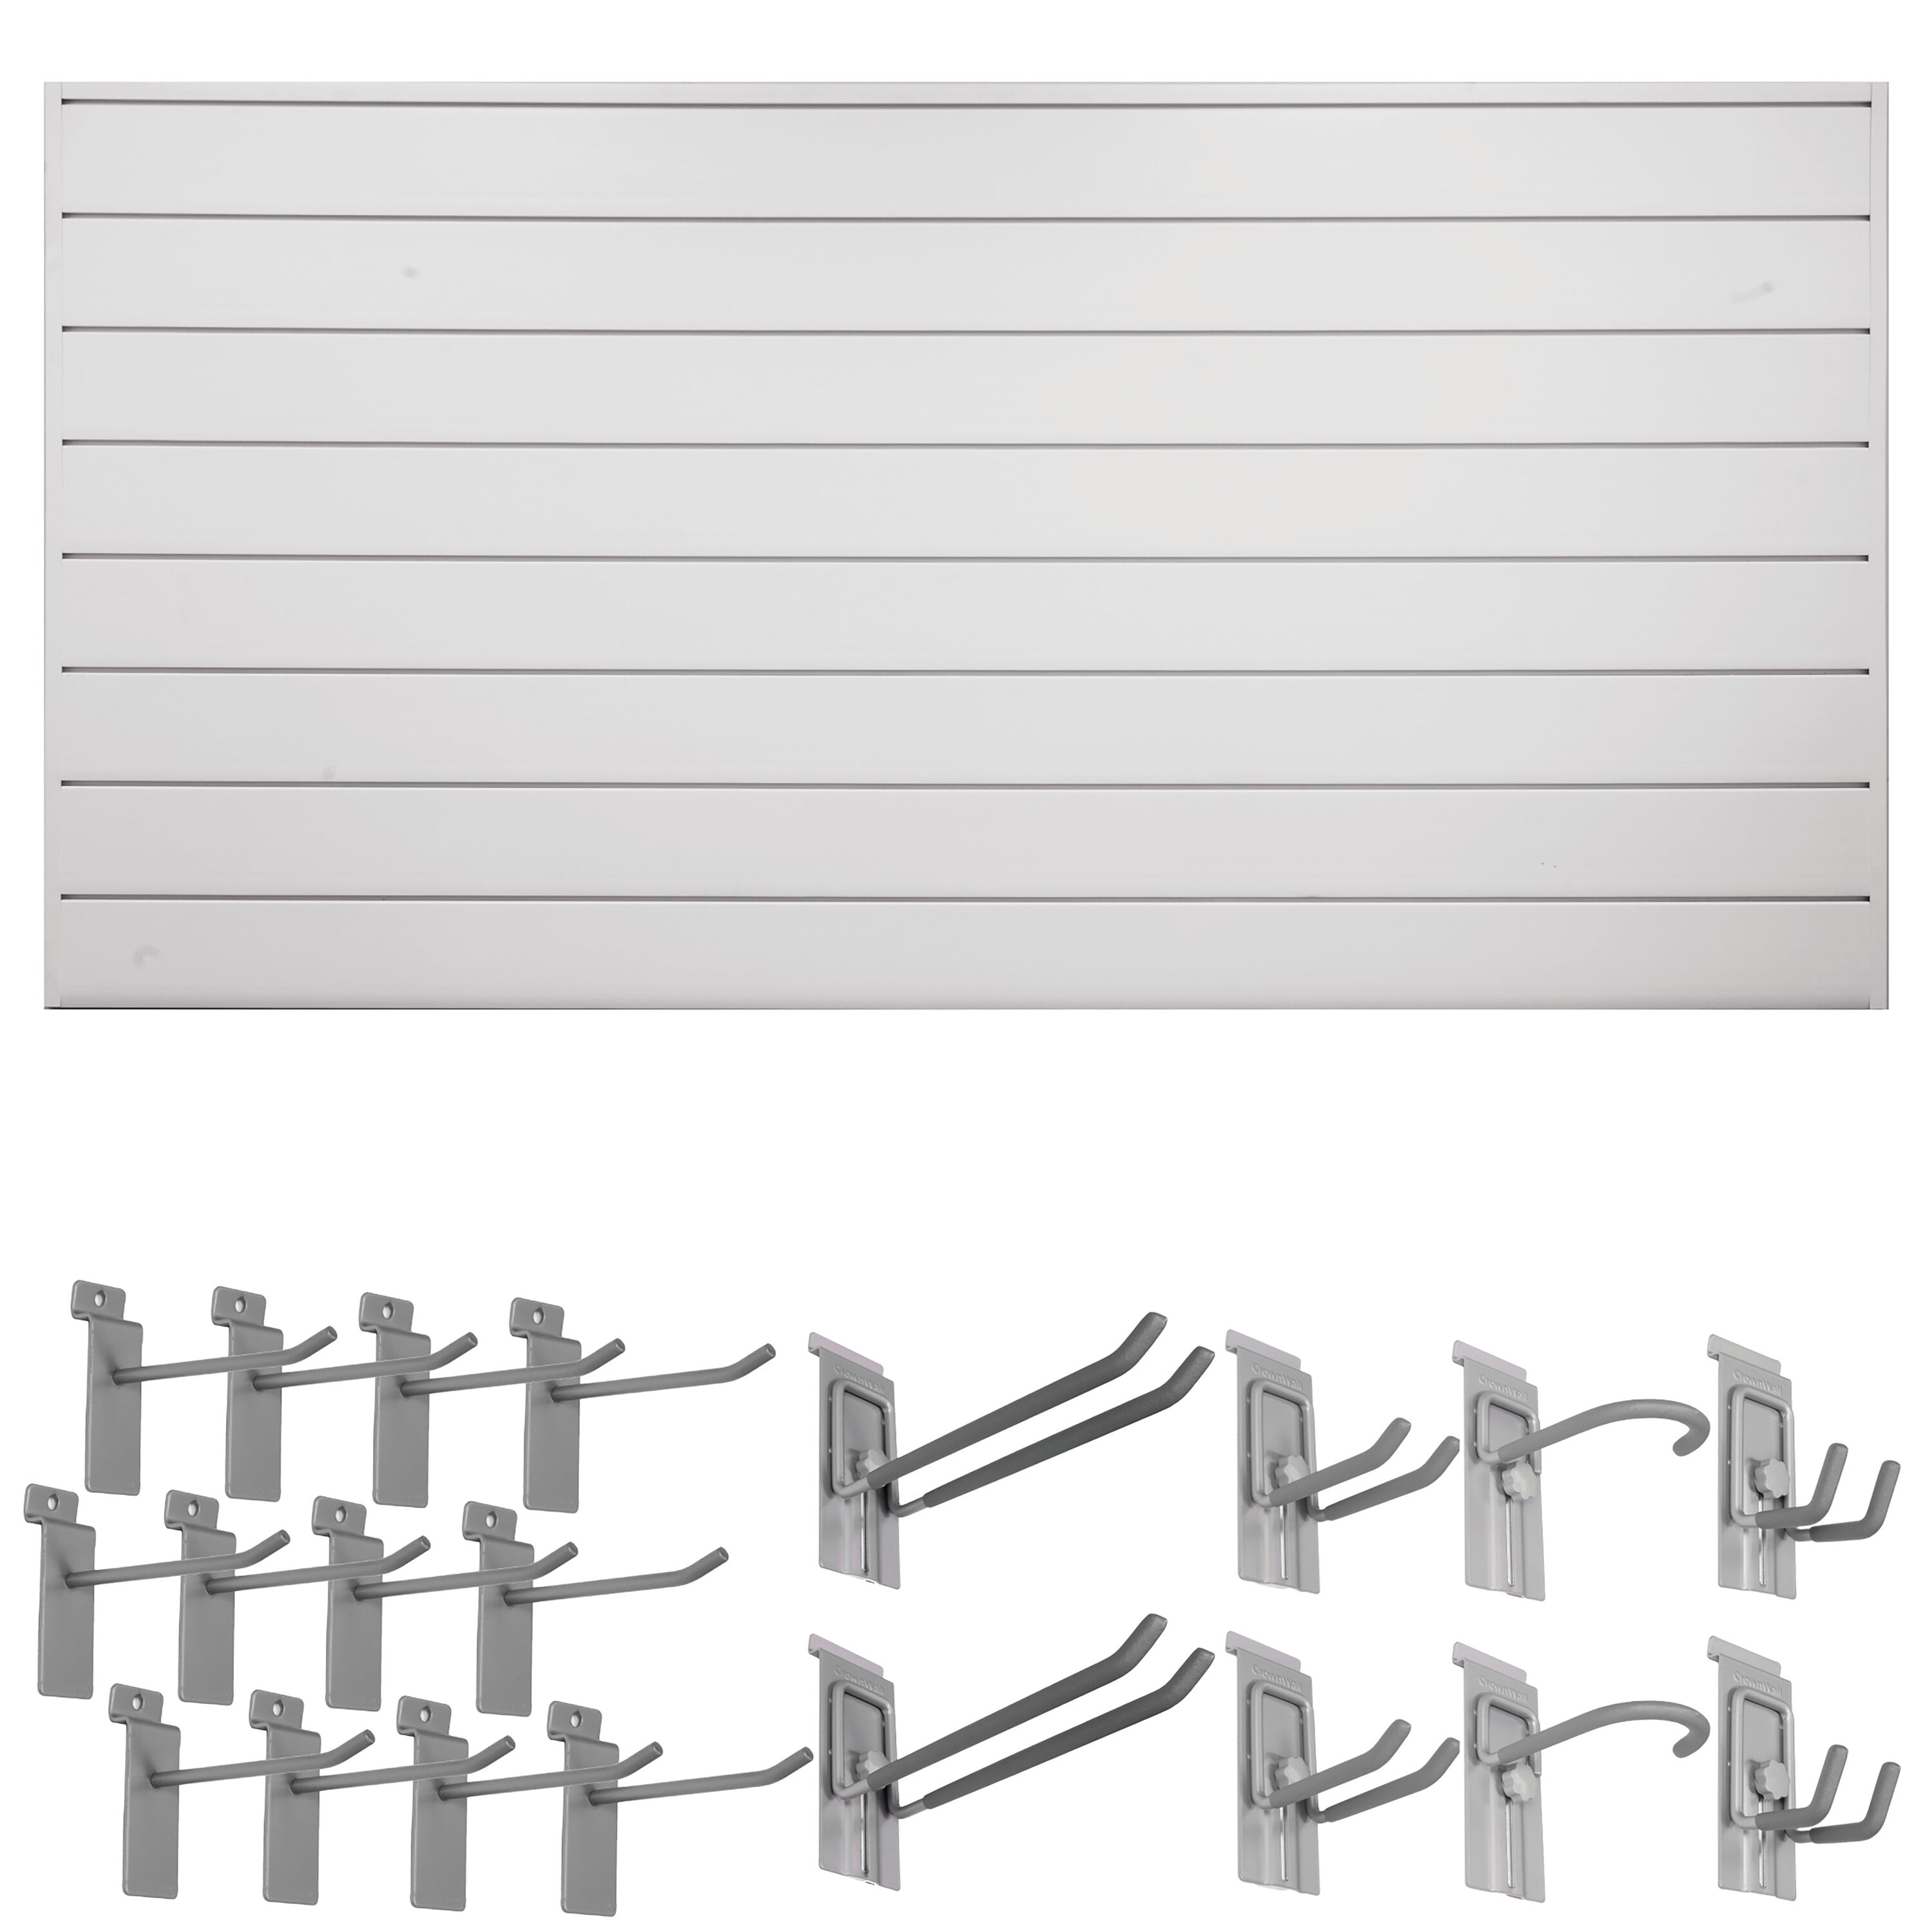 CrownWall 48 in. H x 96 in. W Basic Bundle PVC Slatwall Panel Set with  Locking Hook Kit in Dove Grey (20-Piece) in the Slatwall  Rail Storage  Systems department at